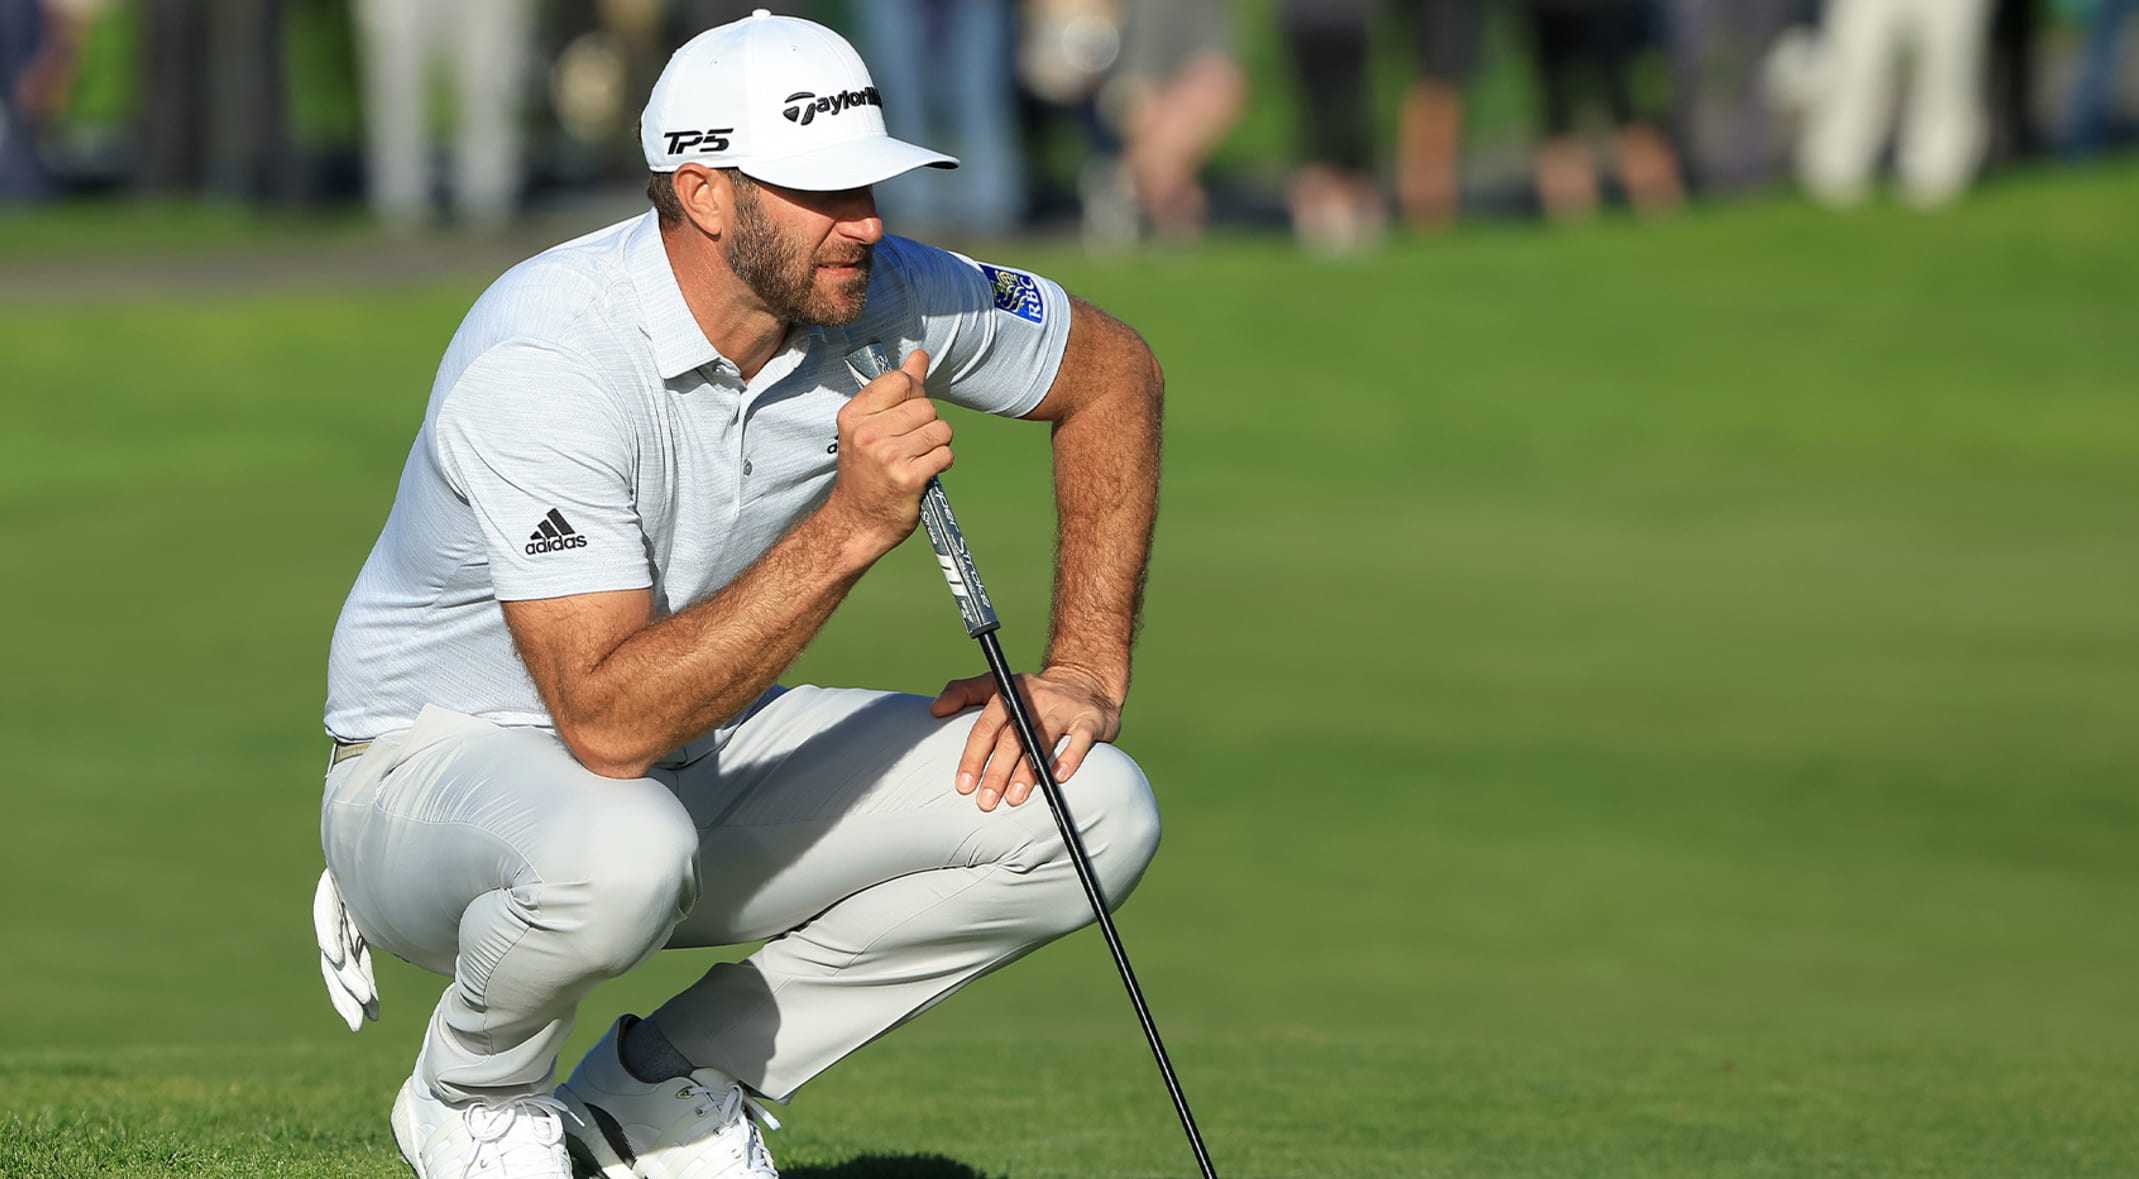 Saudi distraction behind, dustin johnson ready to get back on track. 